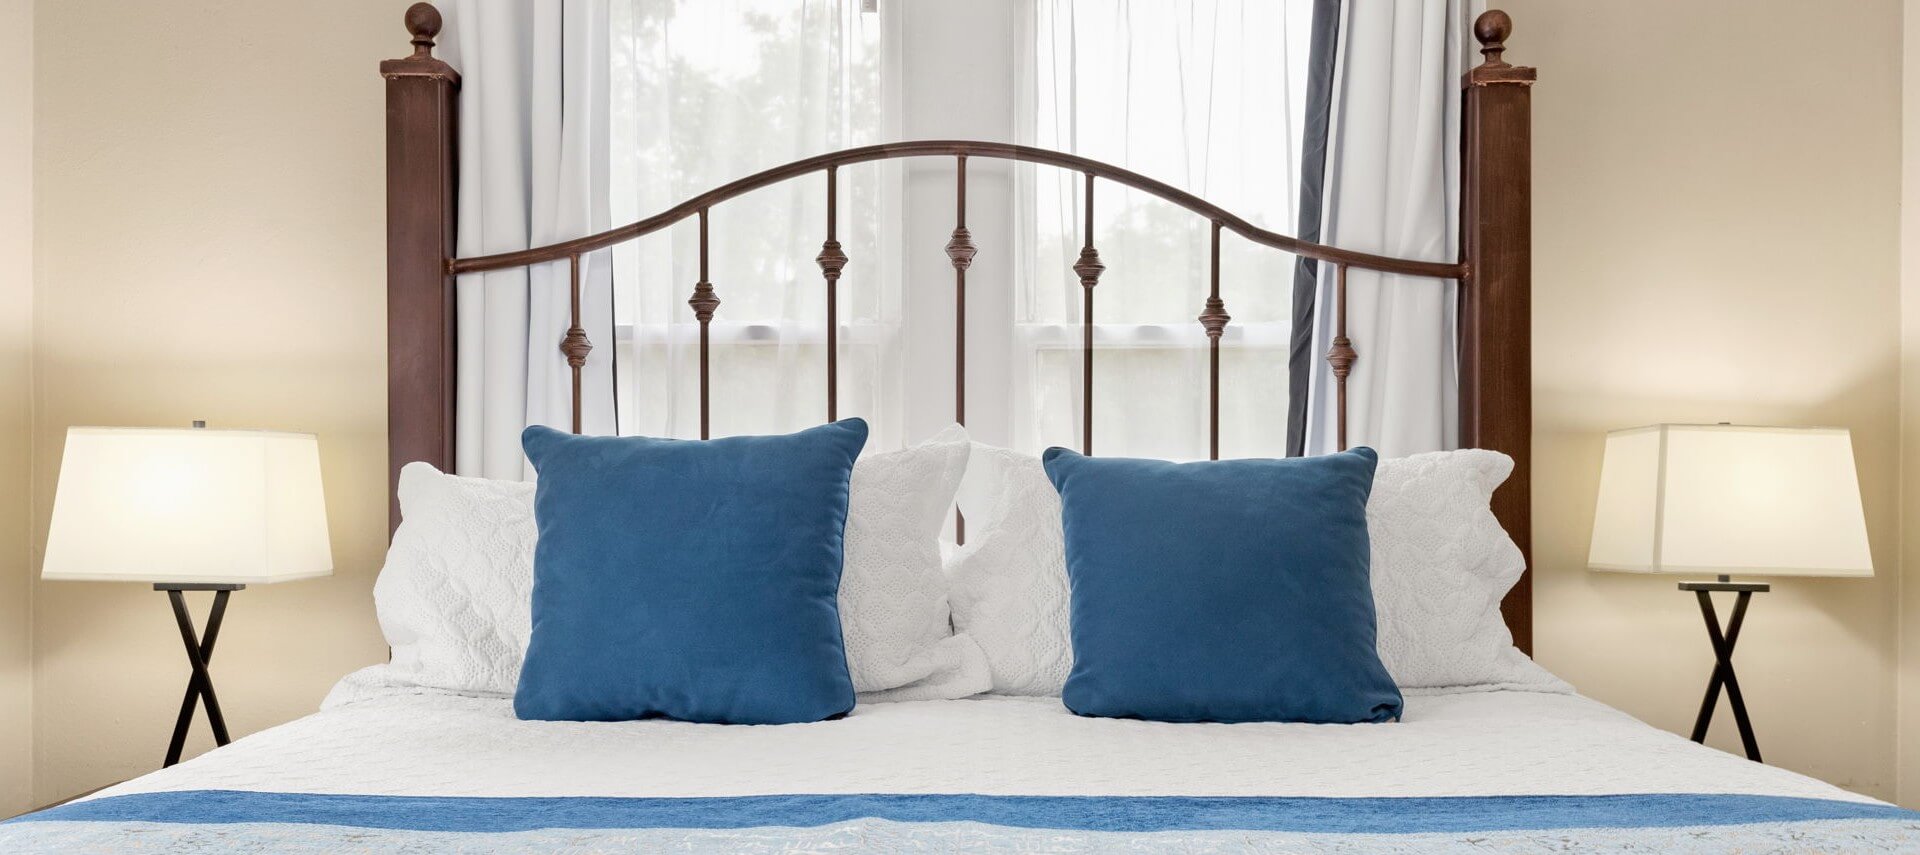 King size bed with blue pillows and white bed spread and two lamps.